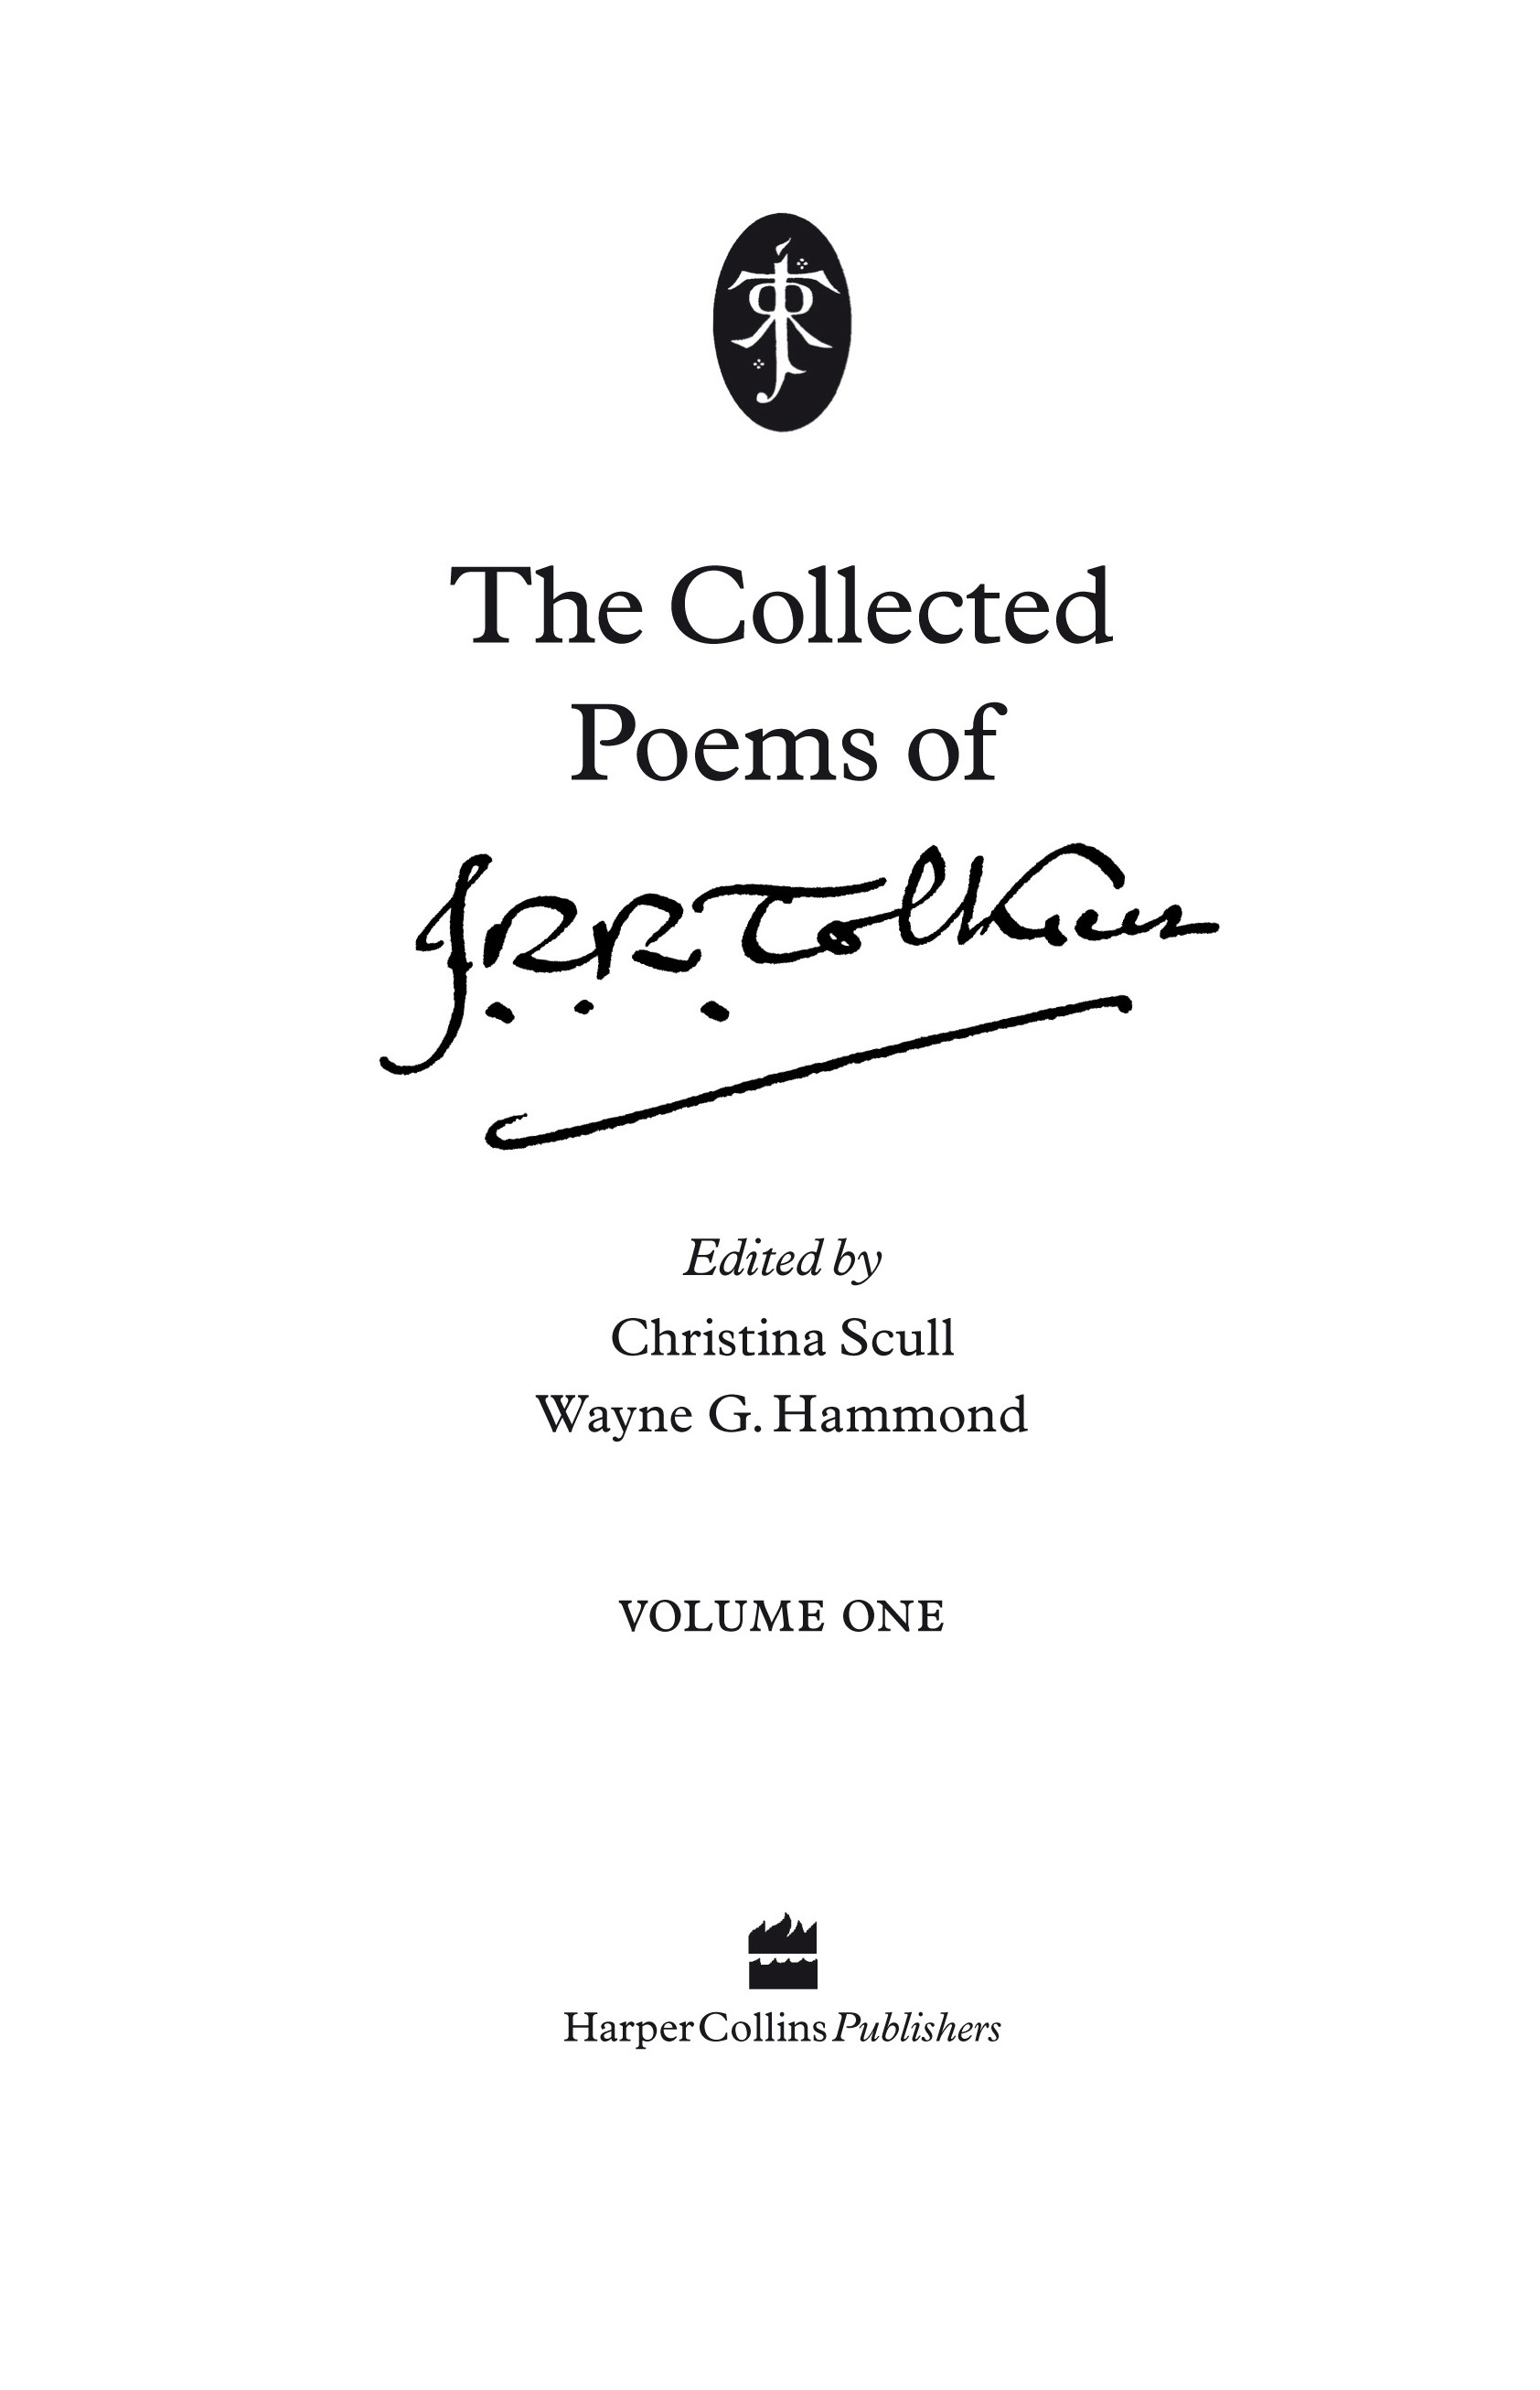 tolkien_collected_poems_trial_tp1-2.jpg